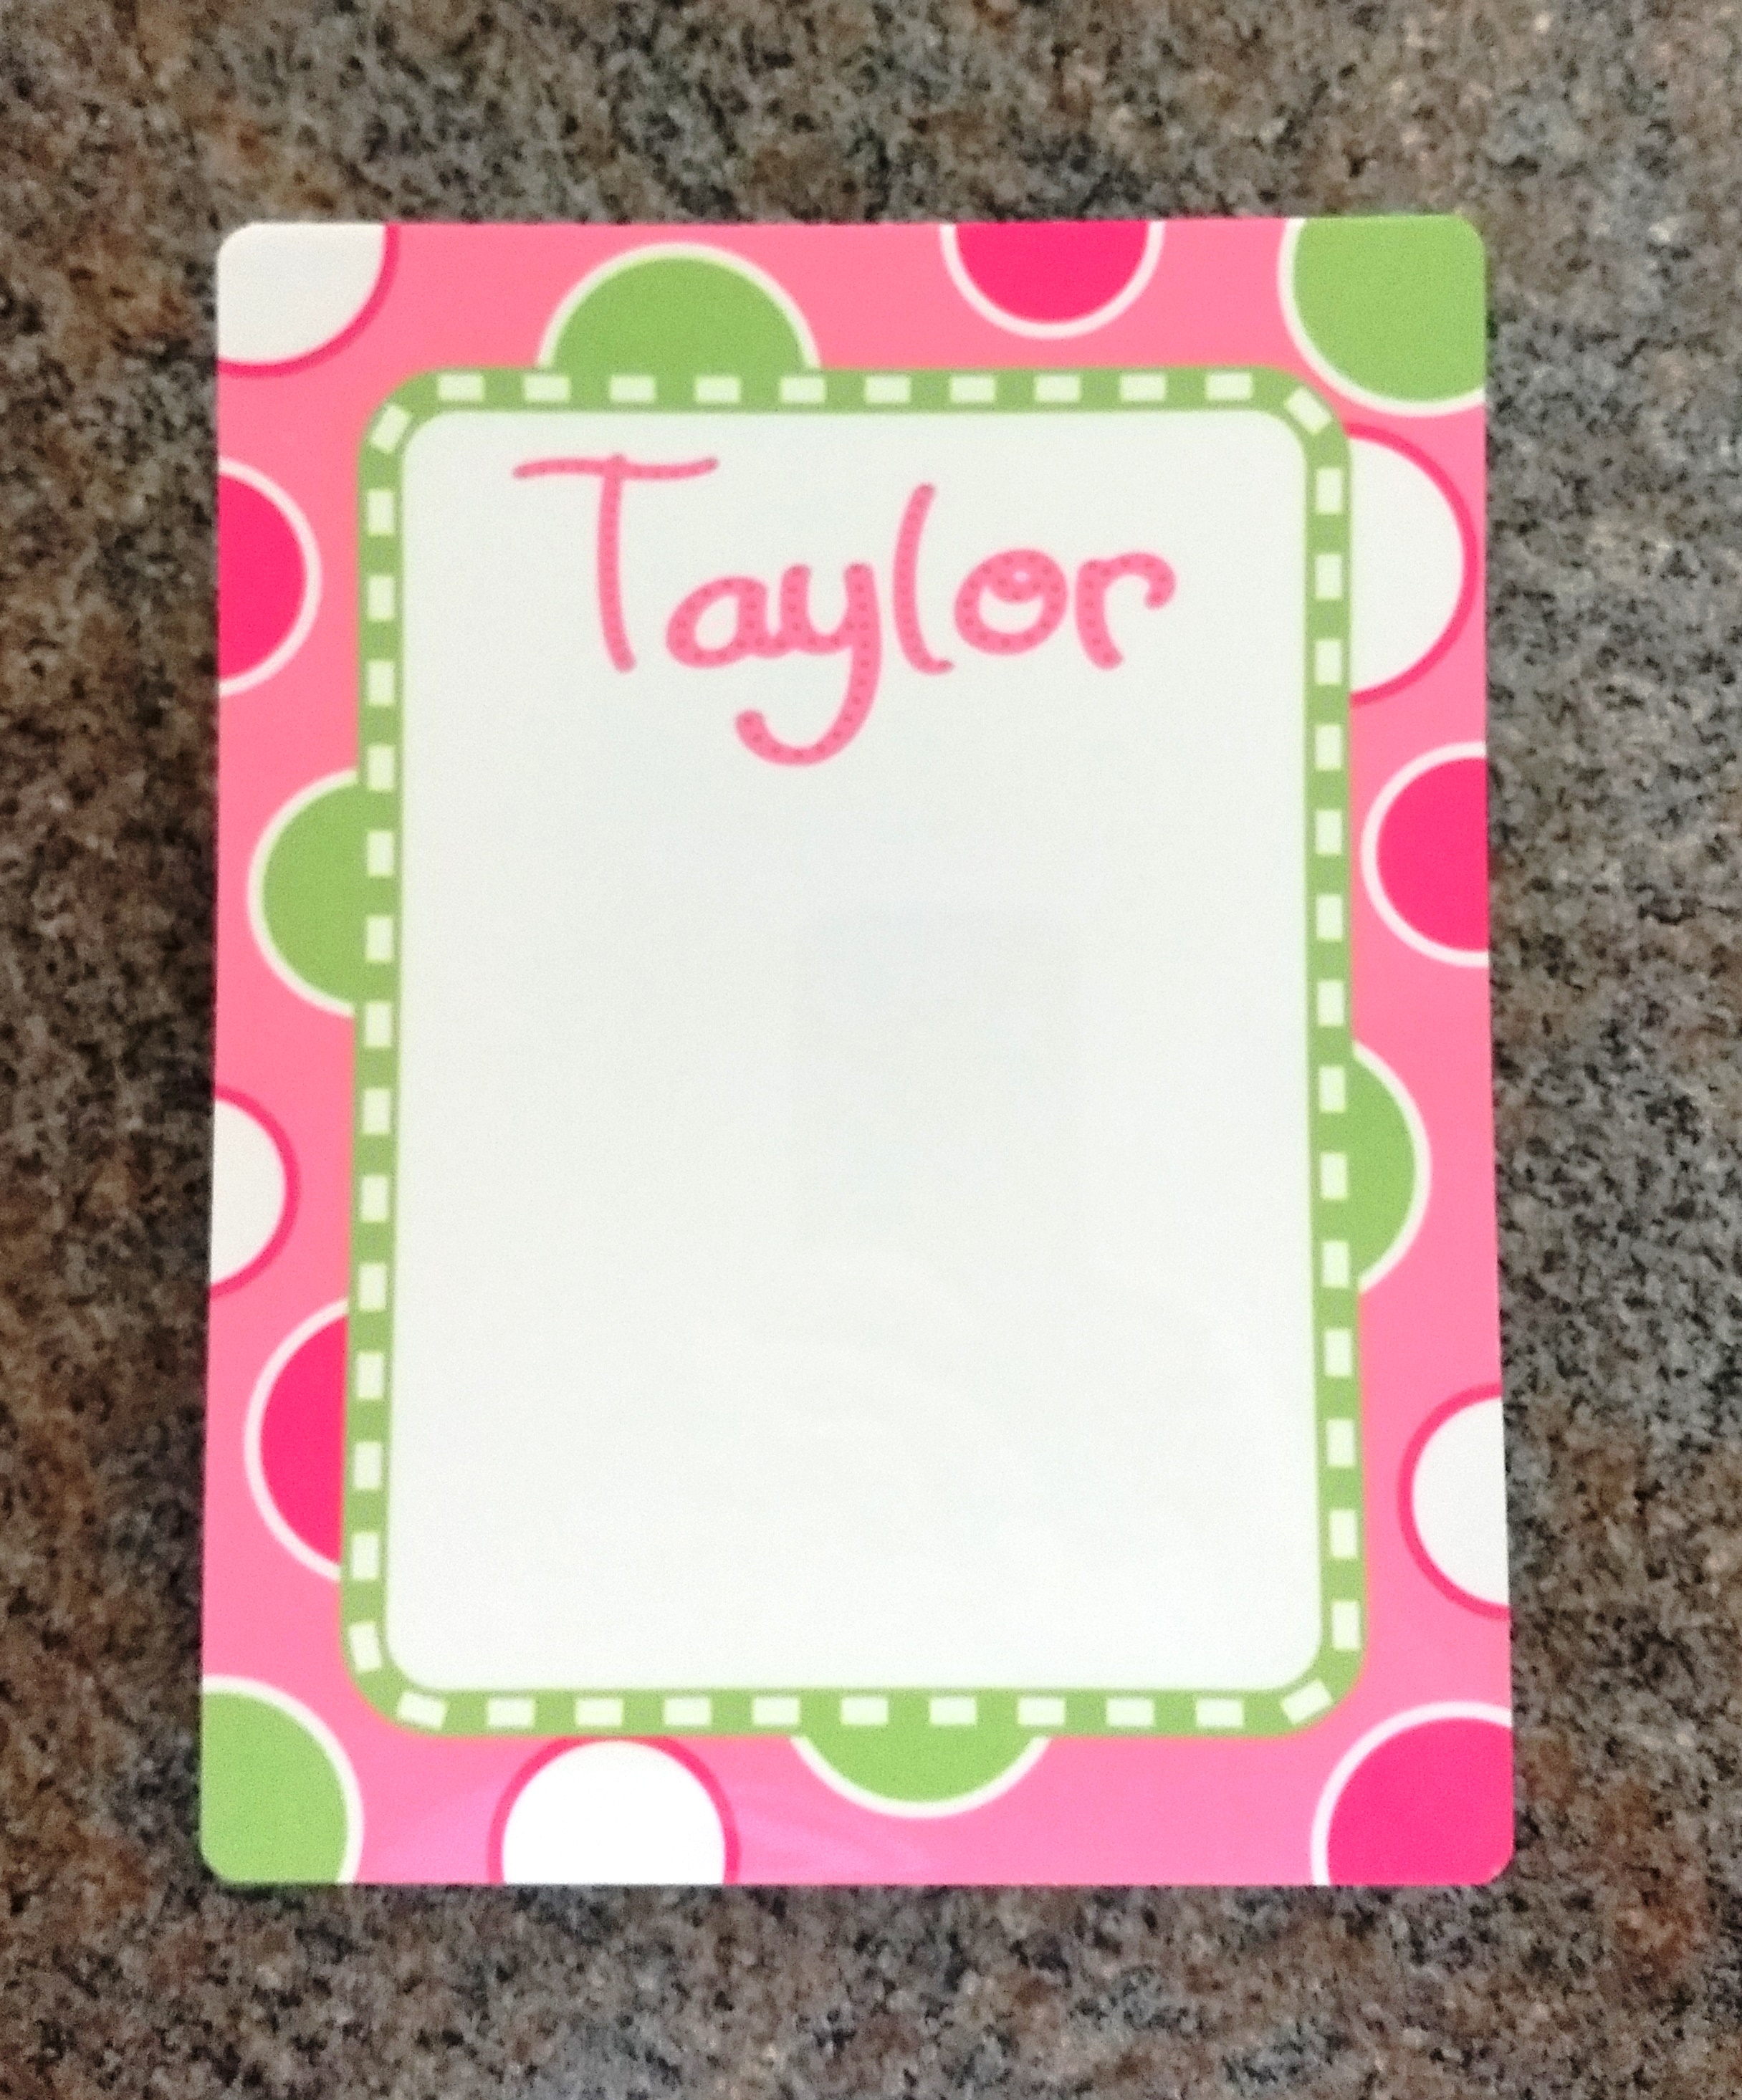 Personalized dry erase board made with sublimation printing